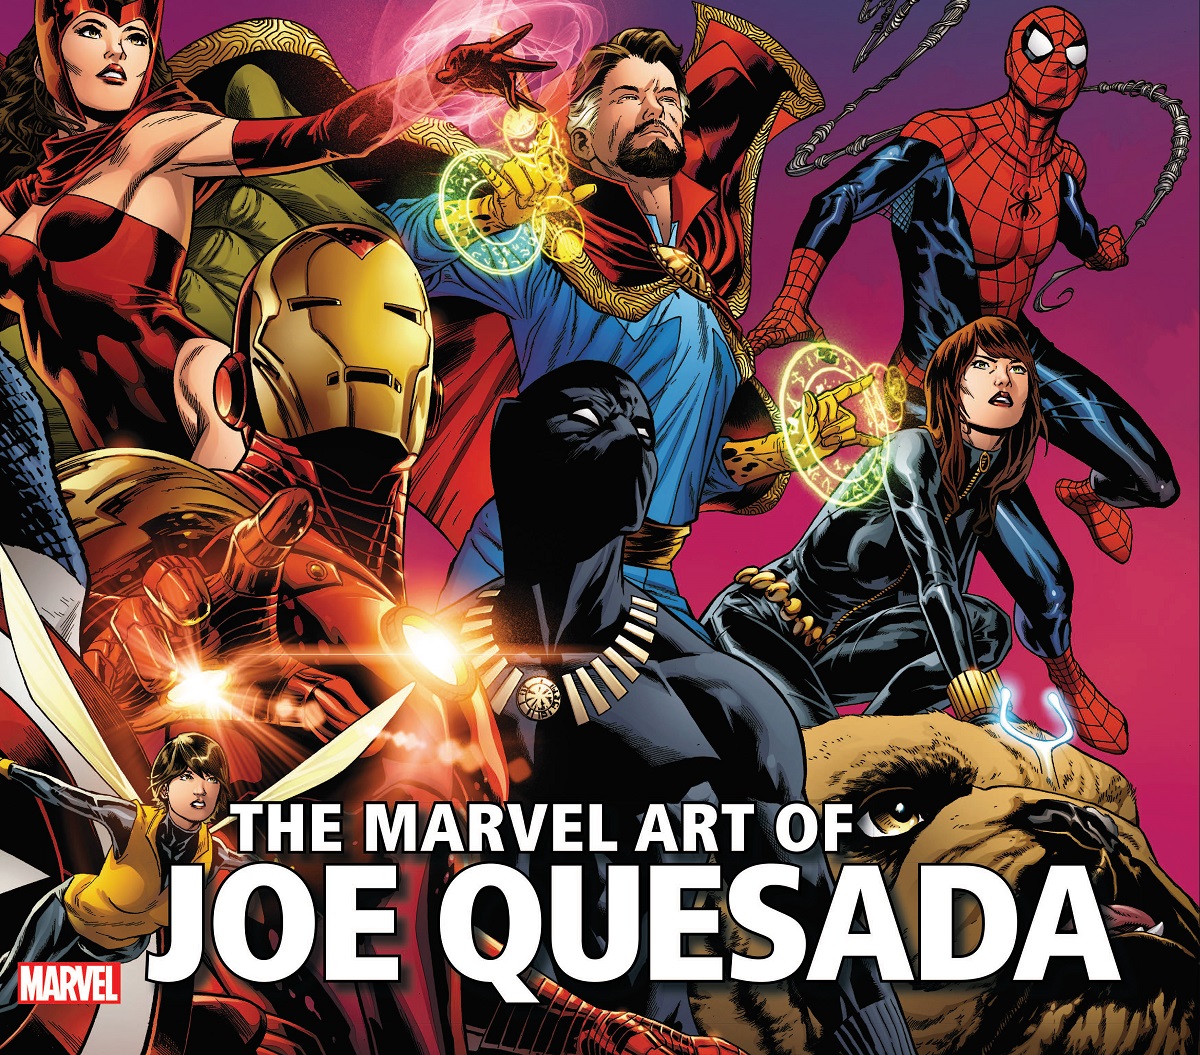 The Marvel Art Of Joe Quesada - Expanded Edition (Hardcover)